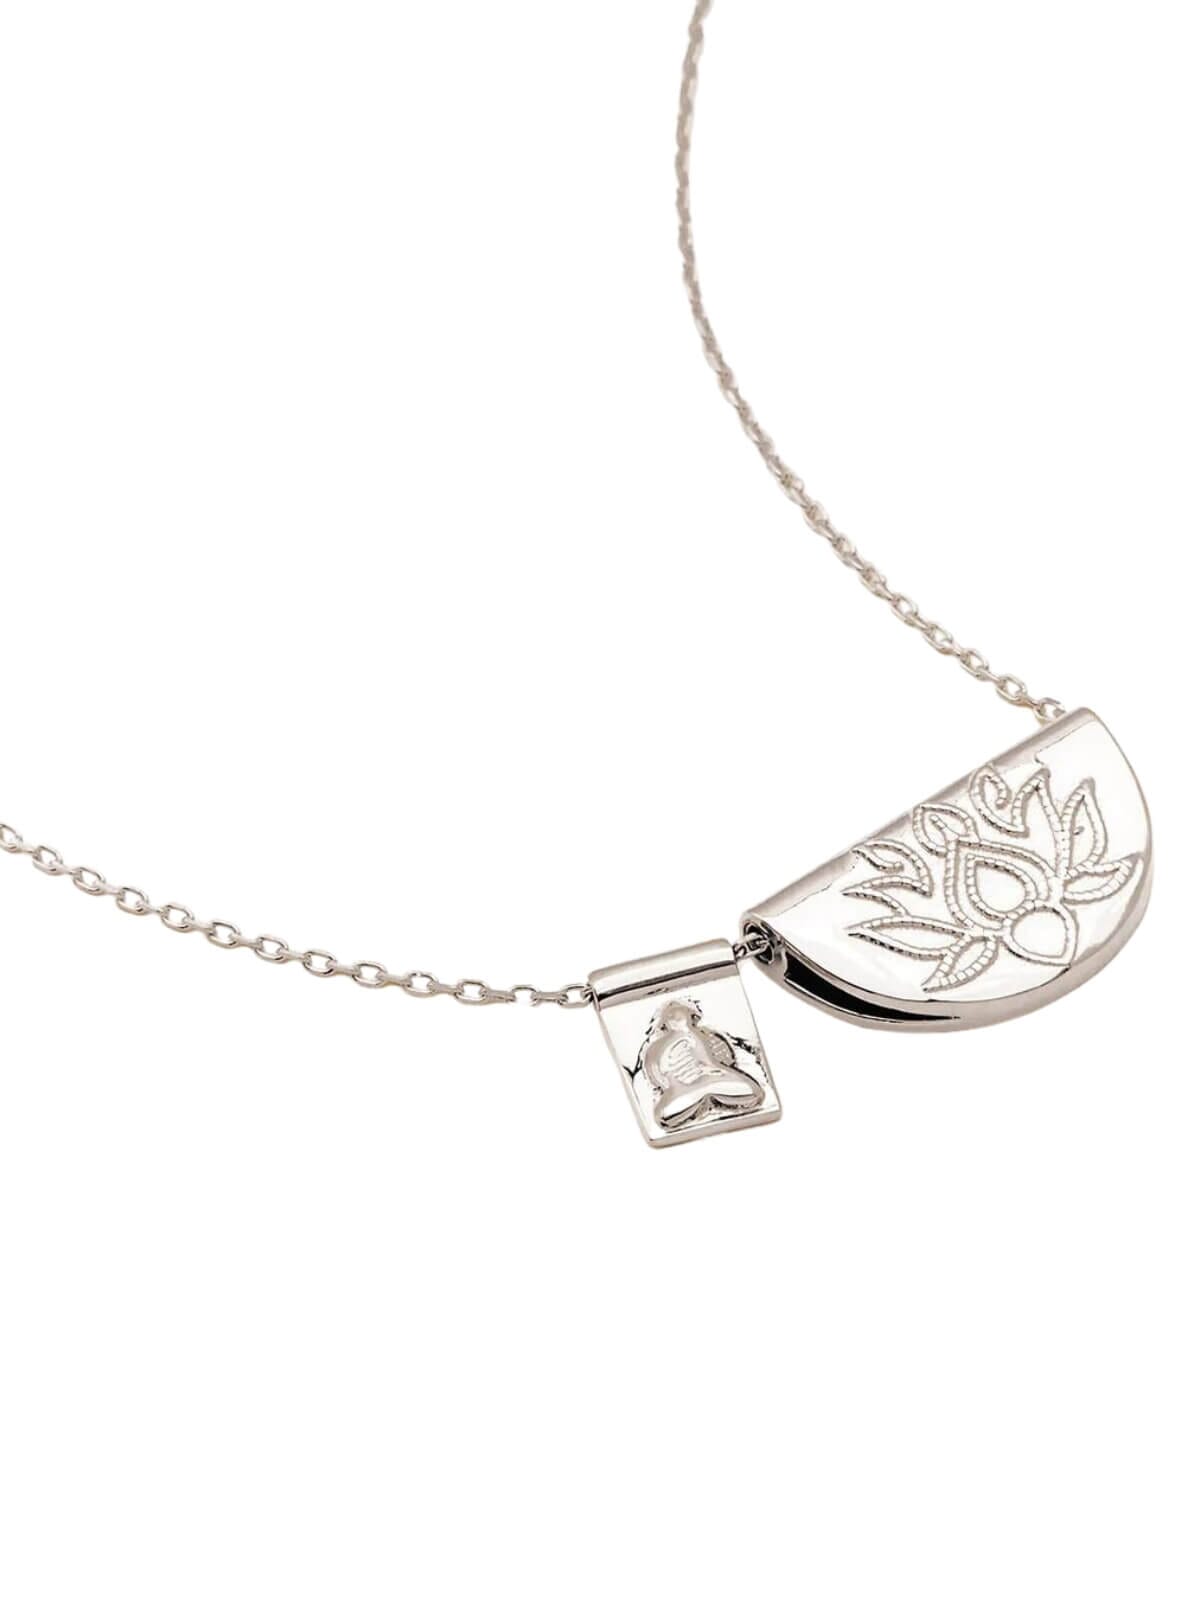 By Charlotte | Lotus and Little Budha Necklace - Silver | Perlu